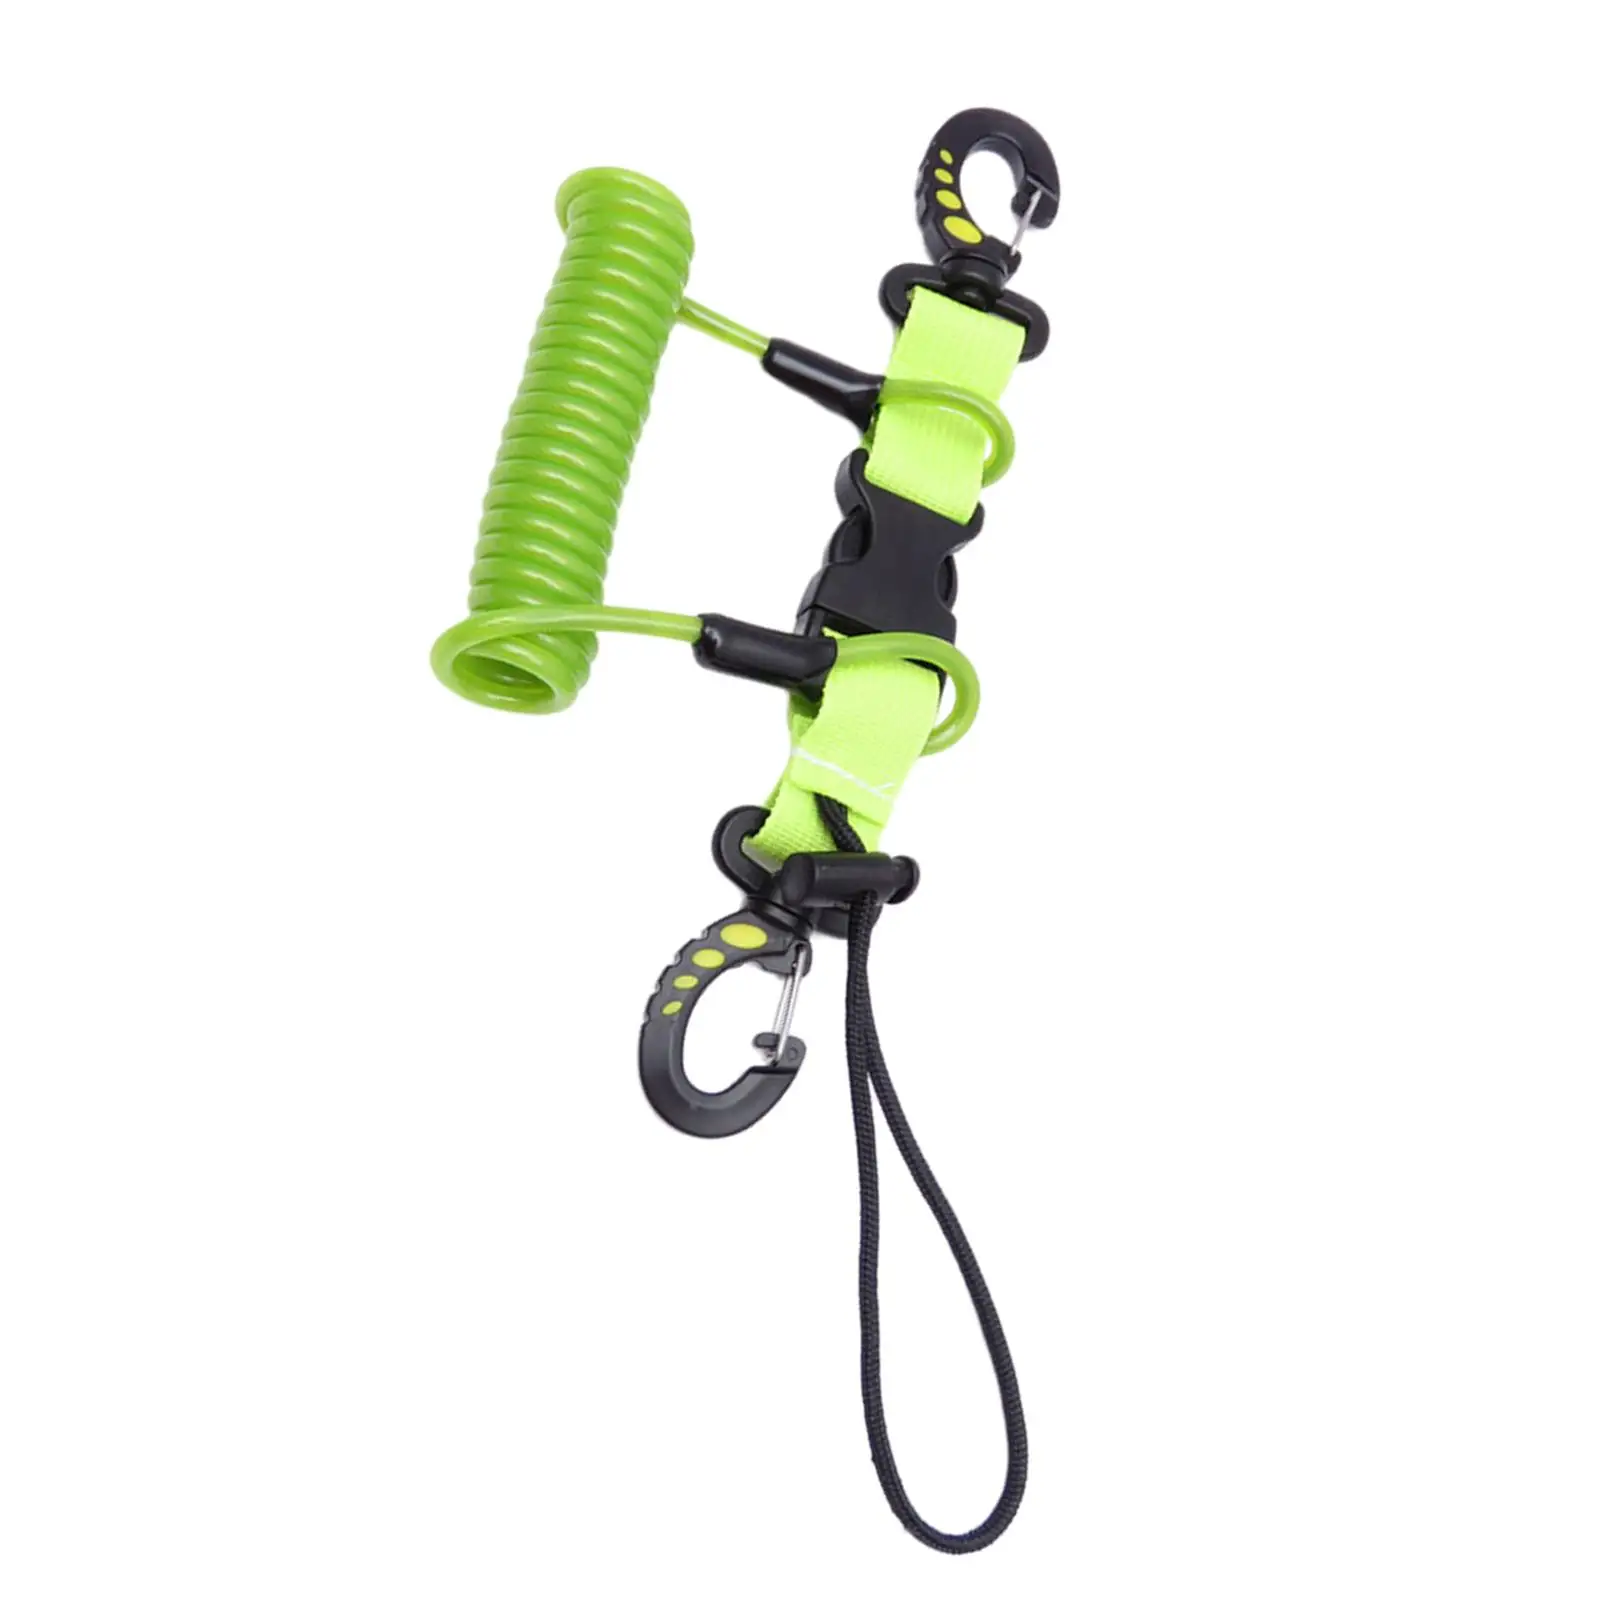 Scuba Diving Anti lost Spiral Spring Coil Lanyard Safety Emergency Tool With Buckle Fishing Dive Climbing Outdoor Rope